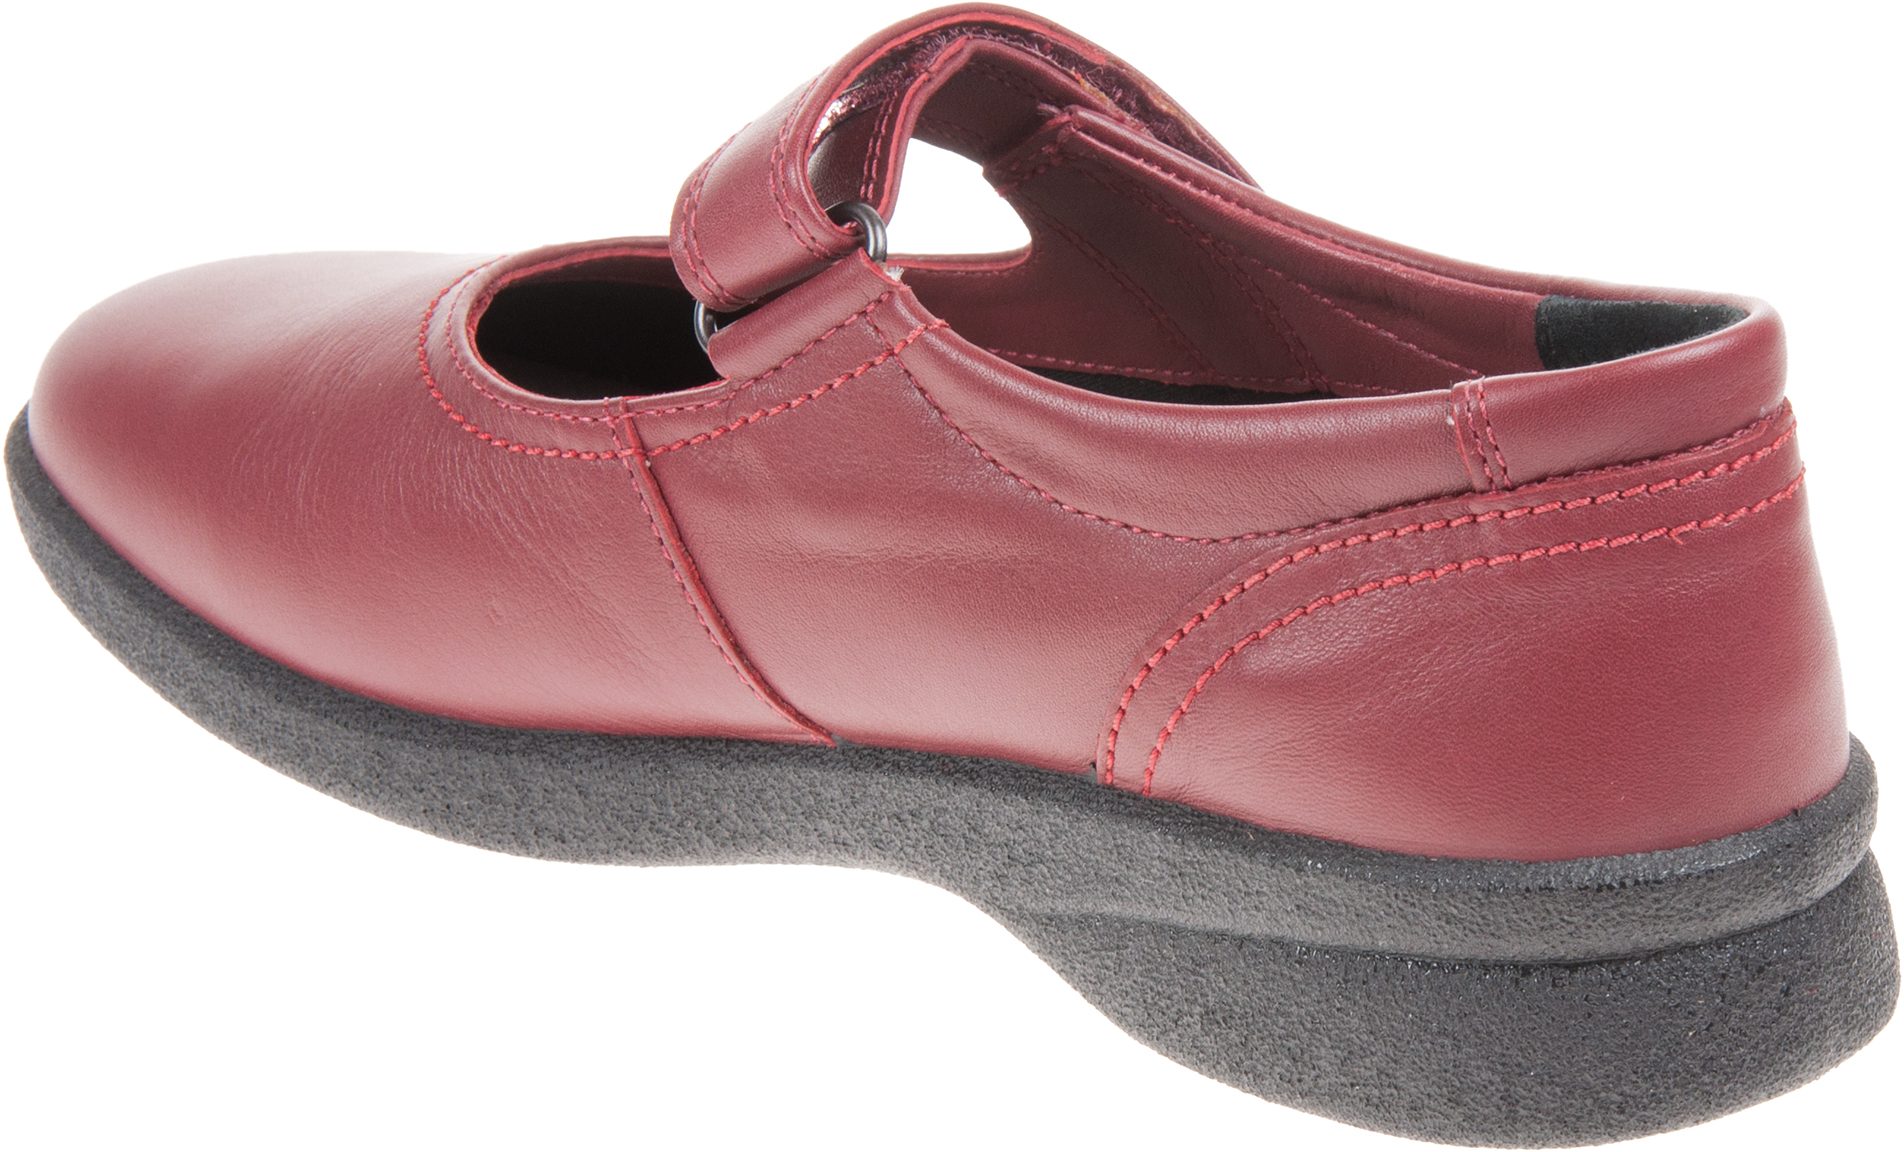 Padders Sprite Cherry 633/41 - Everyday Shoes - Humphries Shoes